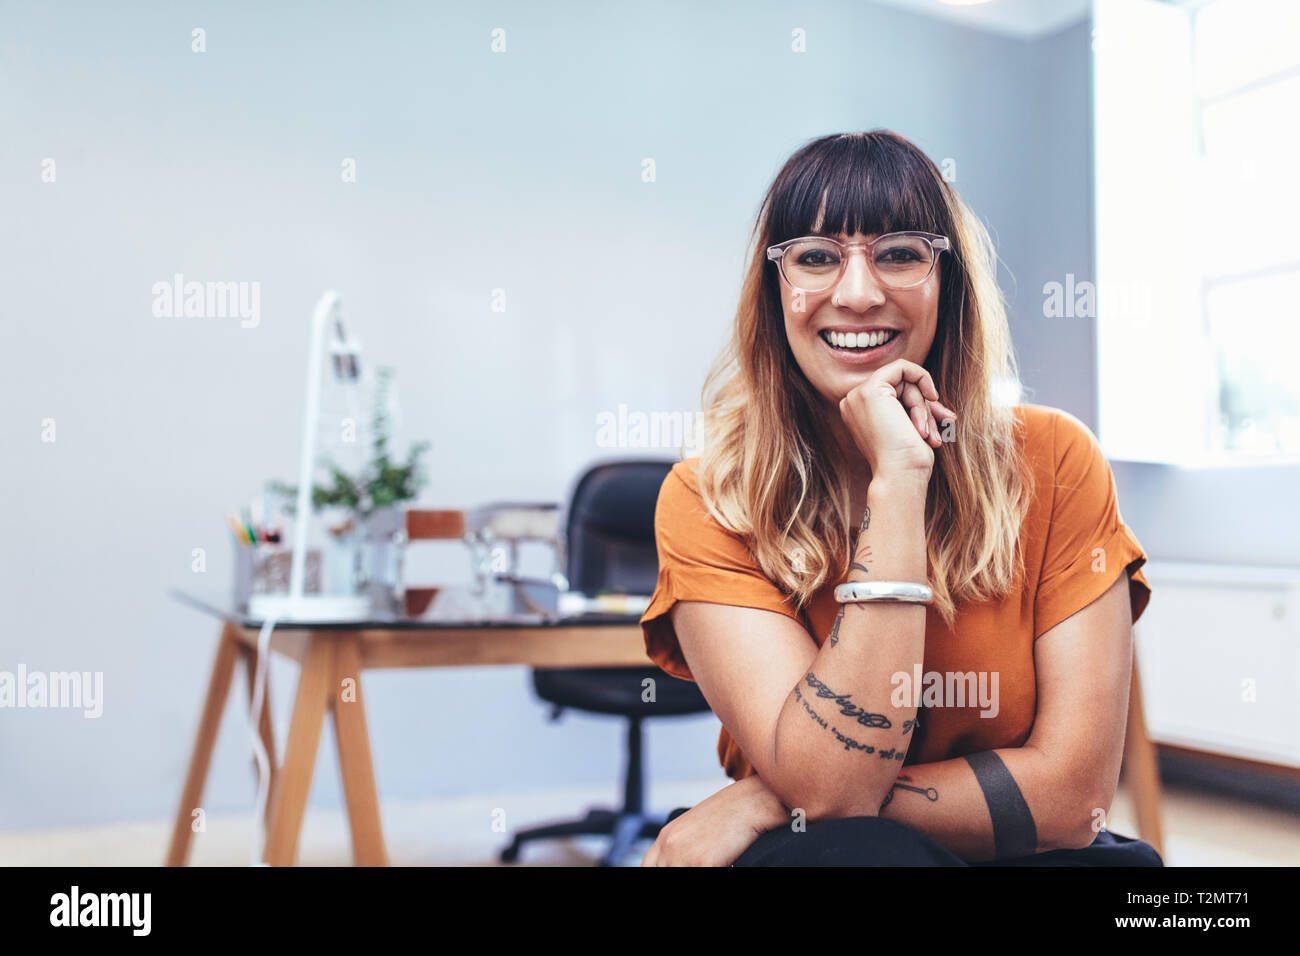 Close up of a smiling woman entrepreneur sitting in her cabin at office. Smiling businesswoman sitting in office resting her chin on hand. Stock Photo